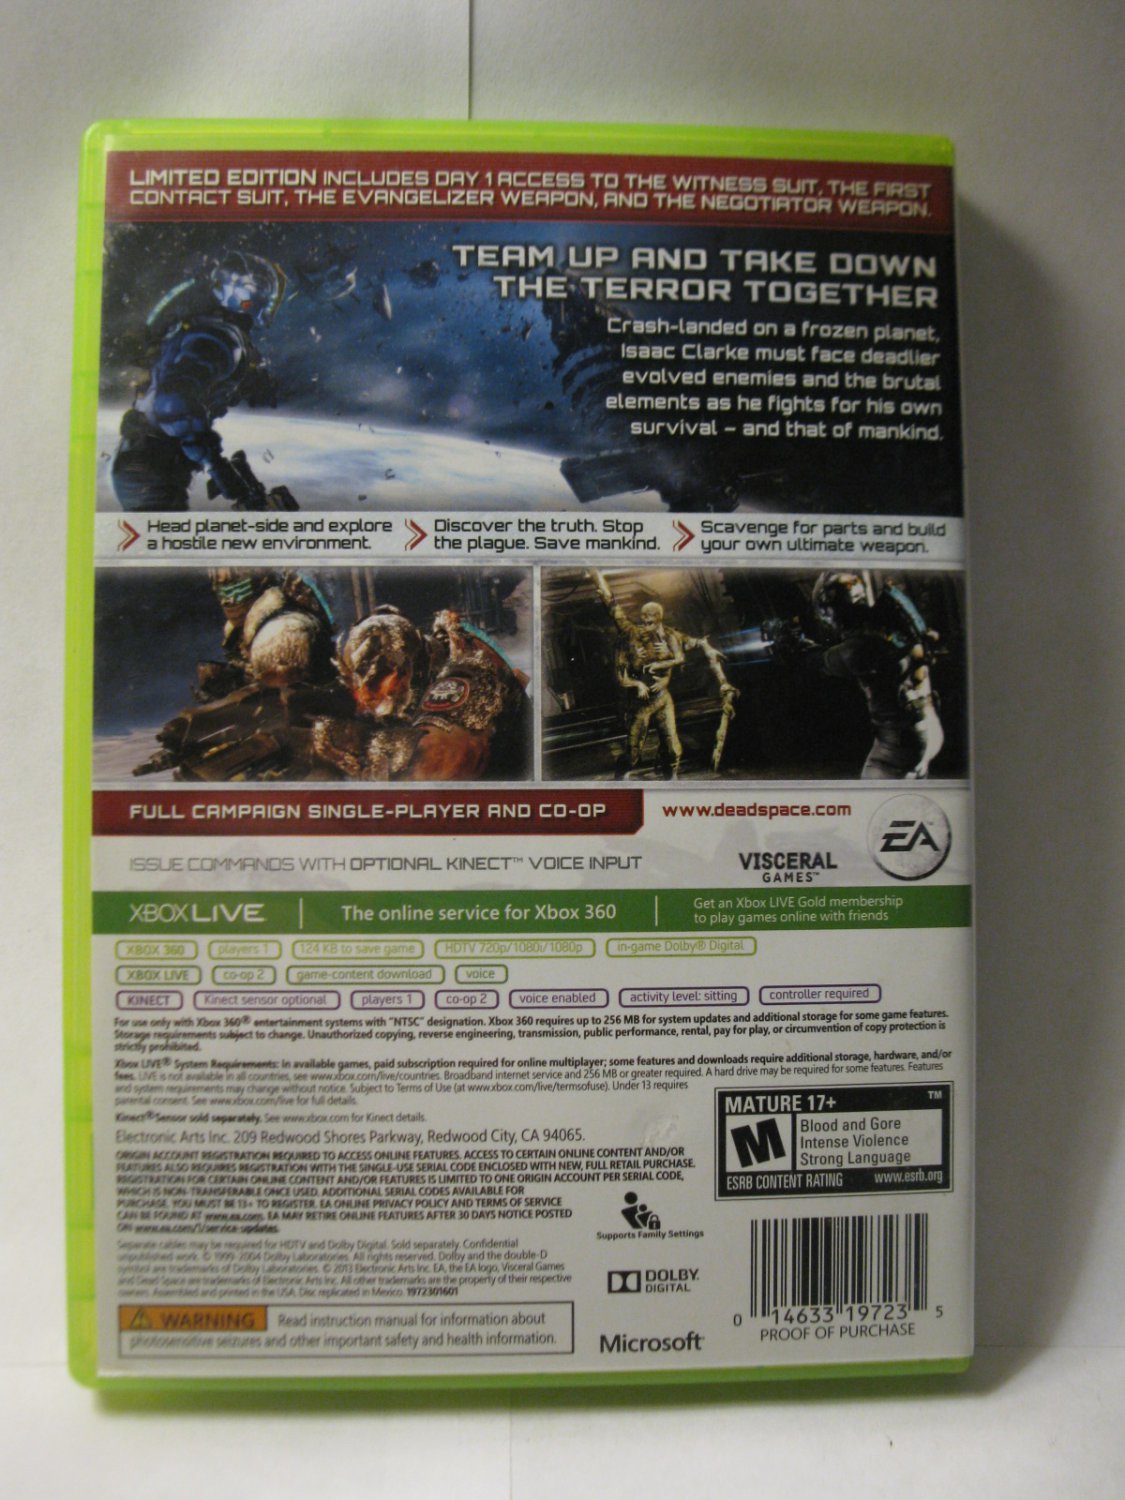 Xbox 360 Video Game: Dead Space 3 - Limited Ed.